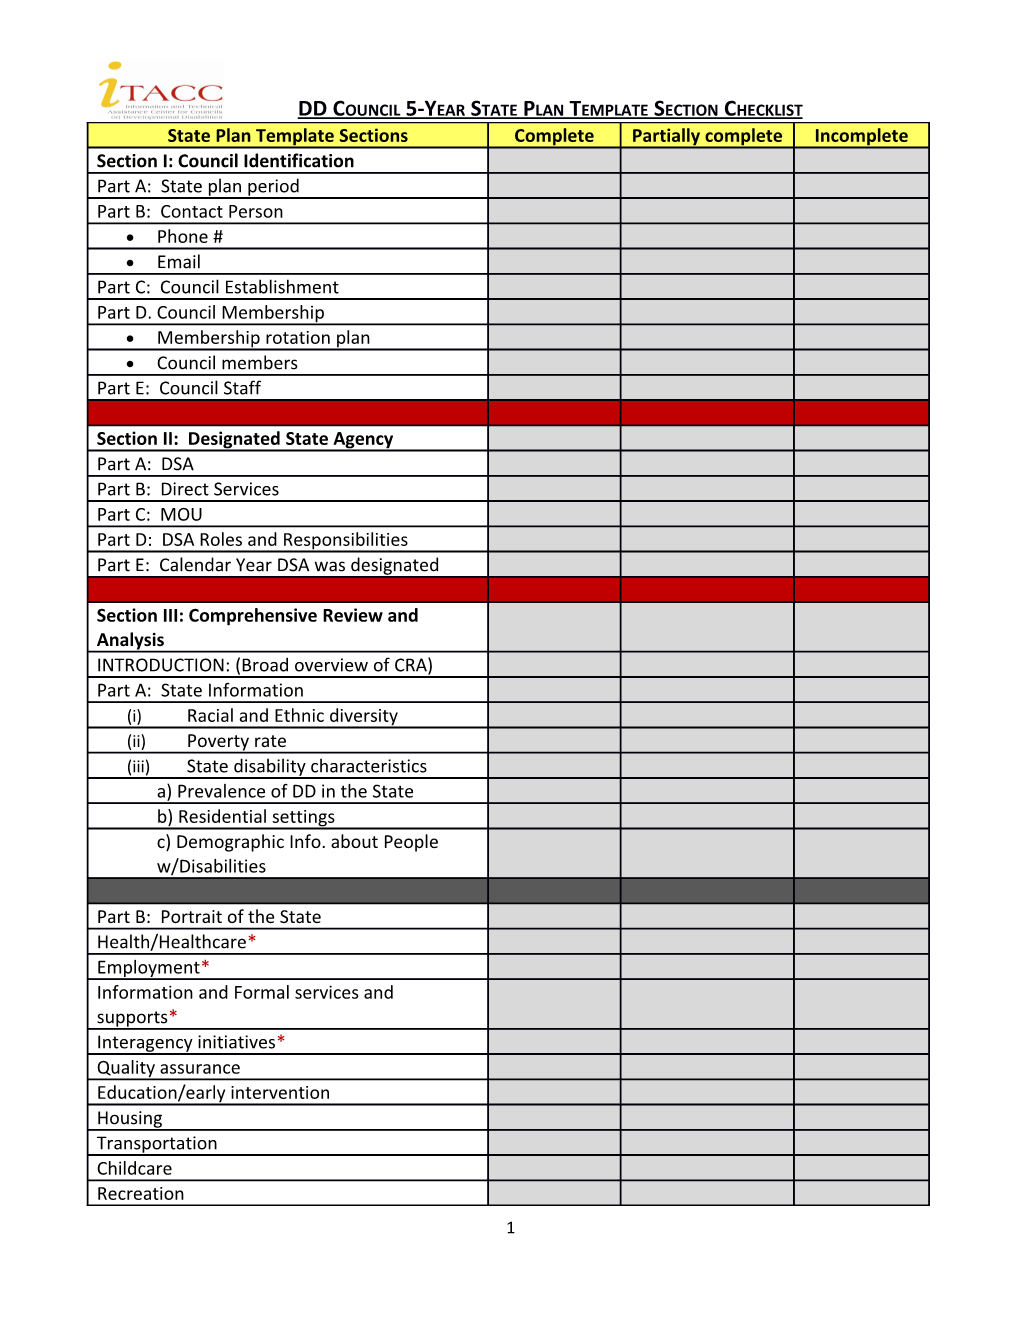 DD Council 5-Year State Plan Template Section Checklist